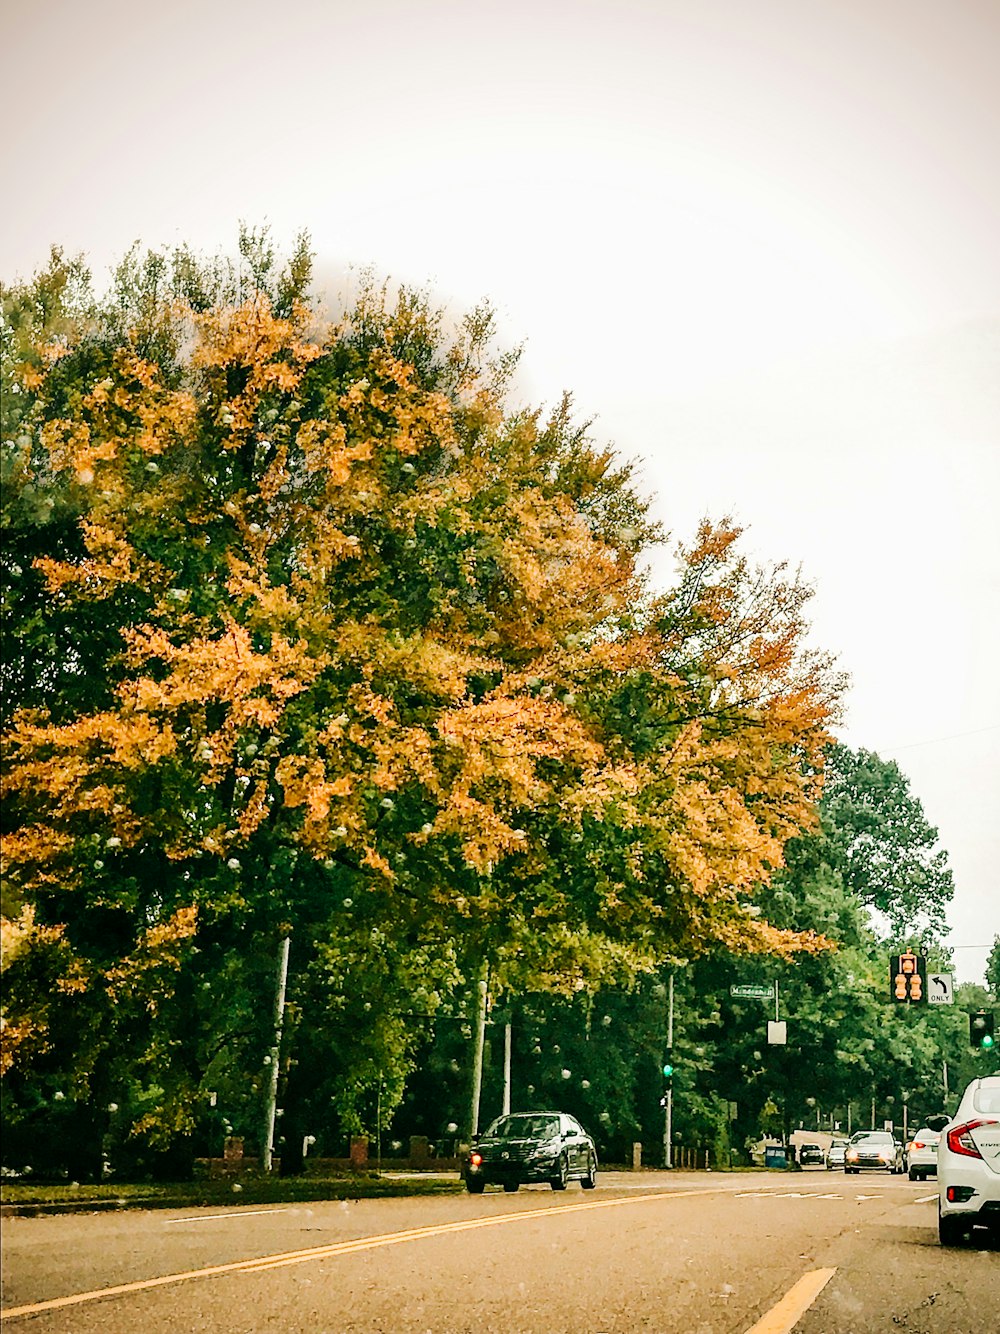 green and yellow trees near cars on road during daytime